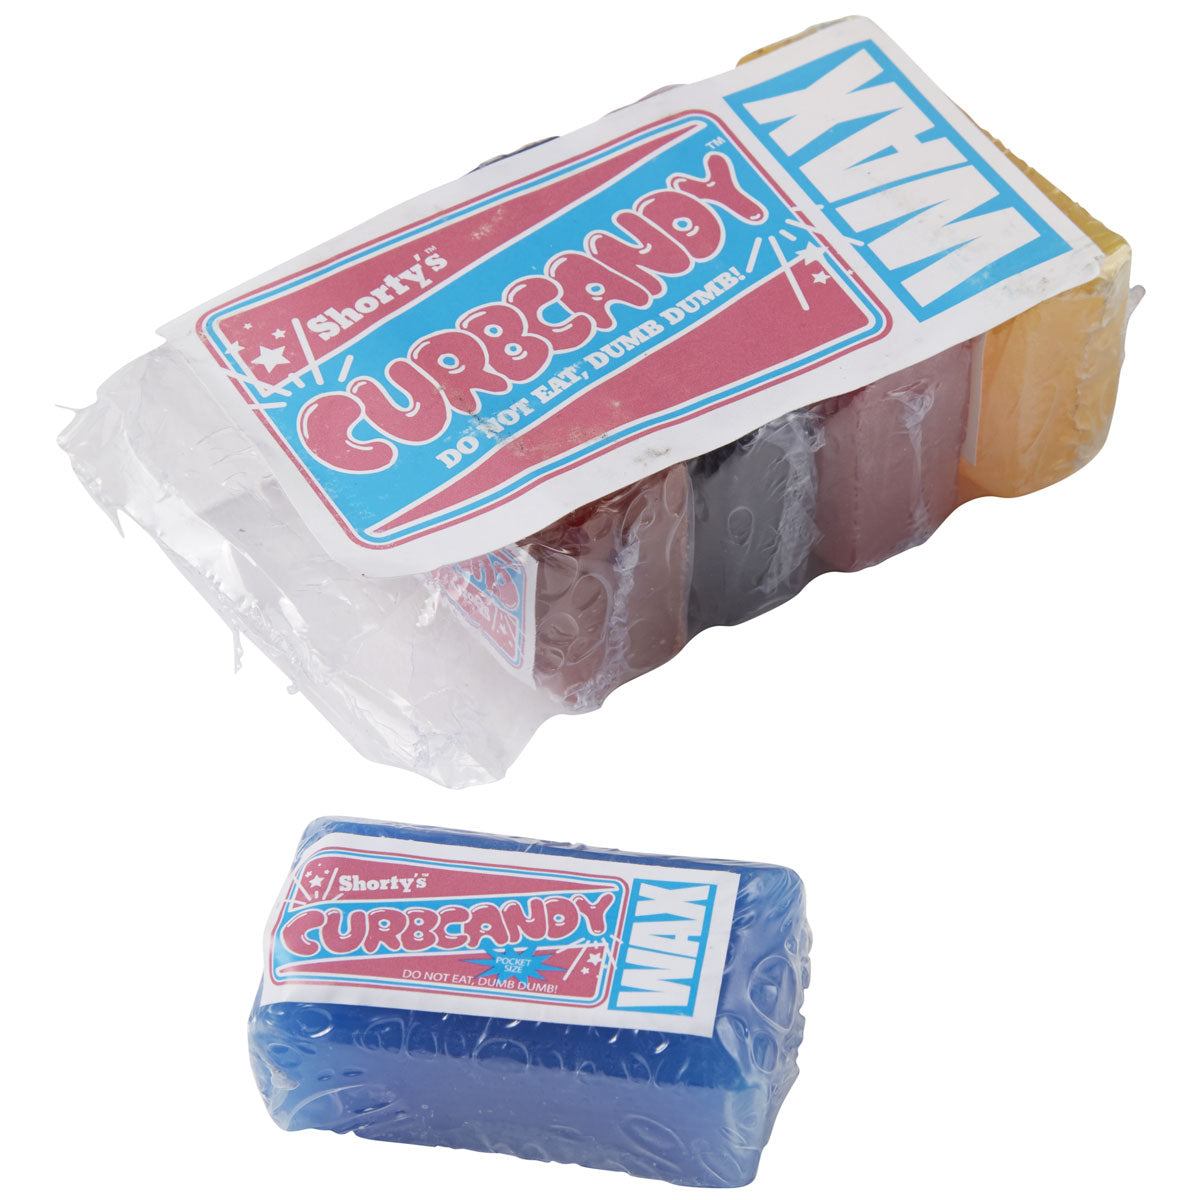 Shorty's Curb Candy 5 Pack of Skate Wax image 1